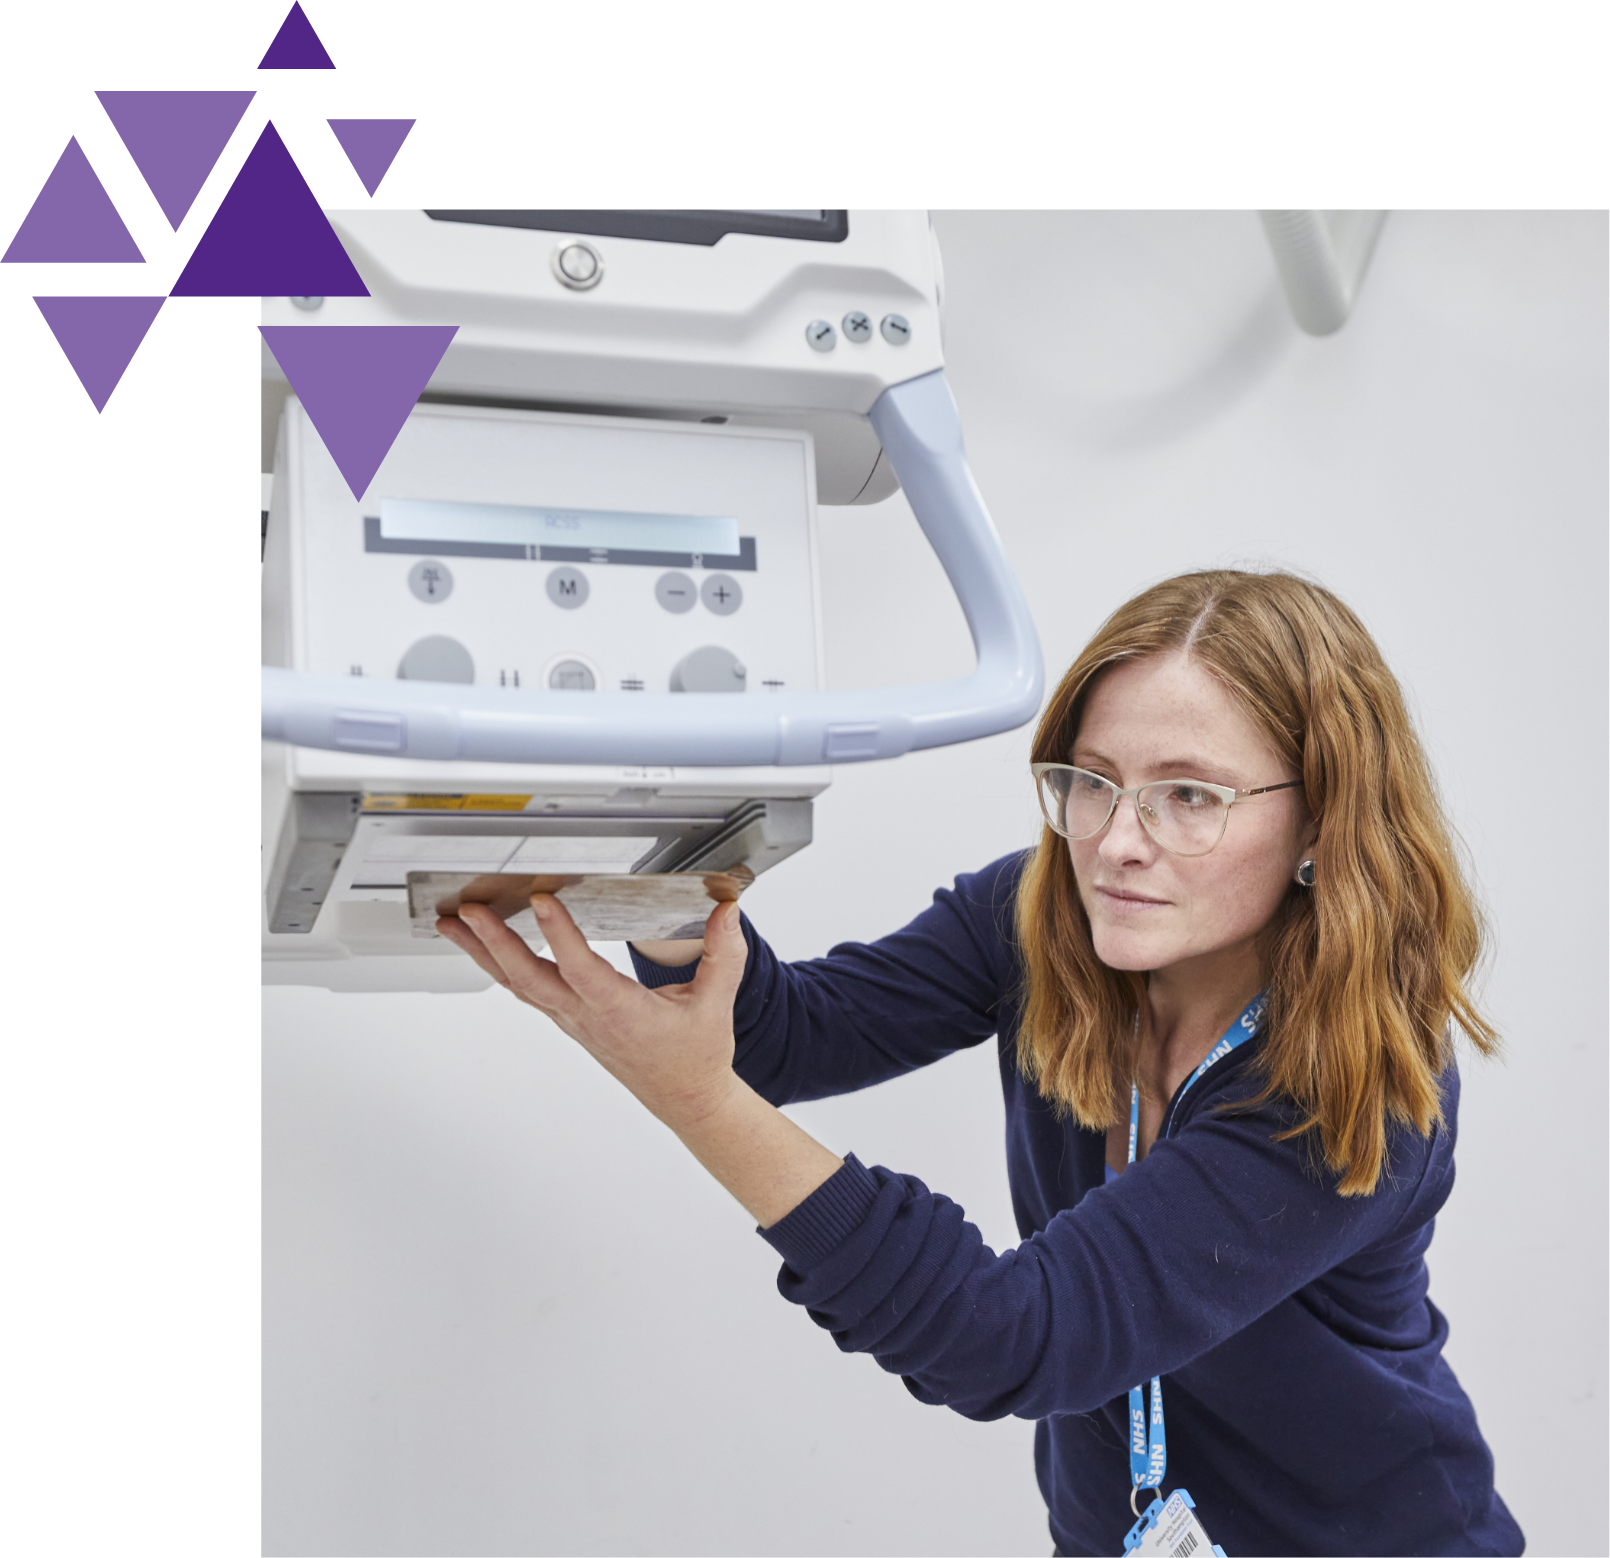 A female technician with glasses and a badge operates a large medical device, focusing intently on adjusting or examining a component.